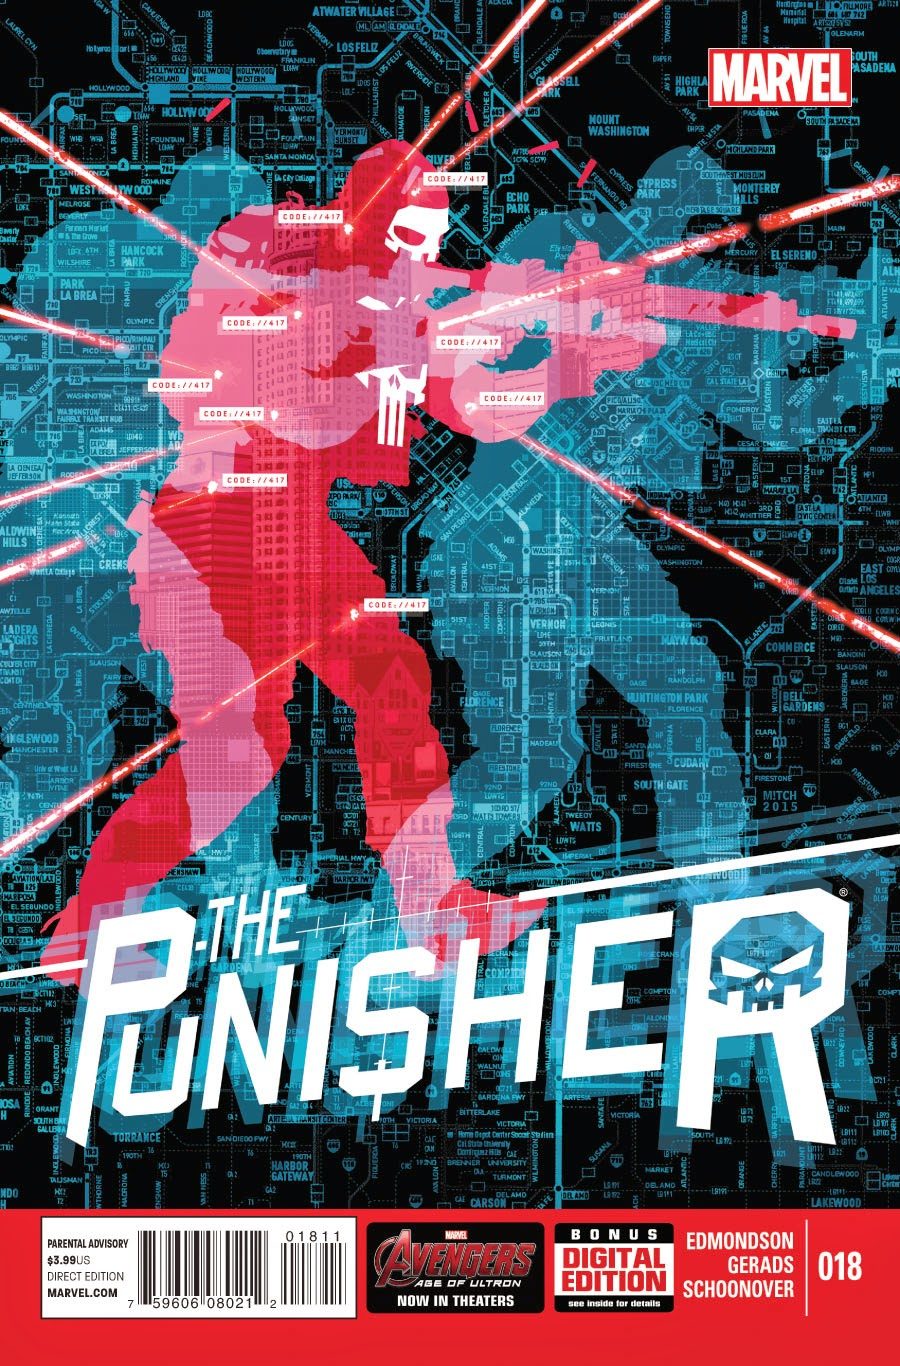 Punisher #18… It ends here.